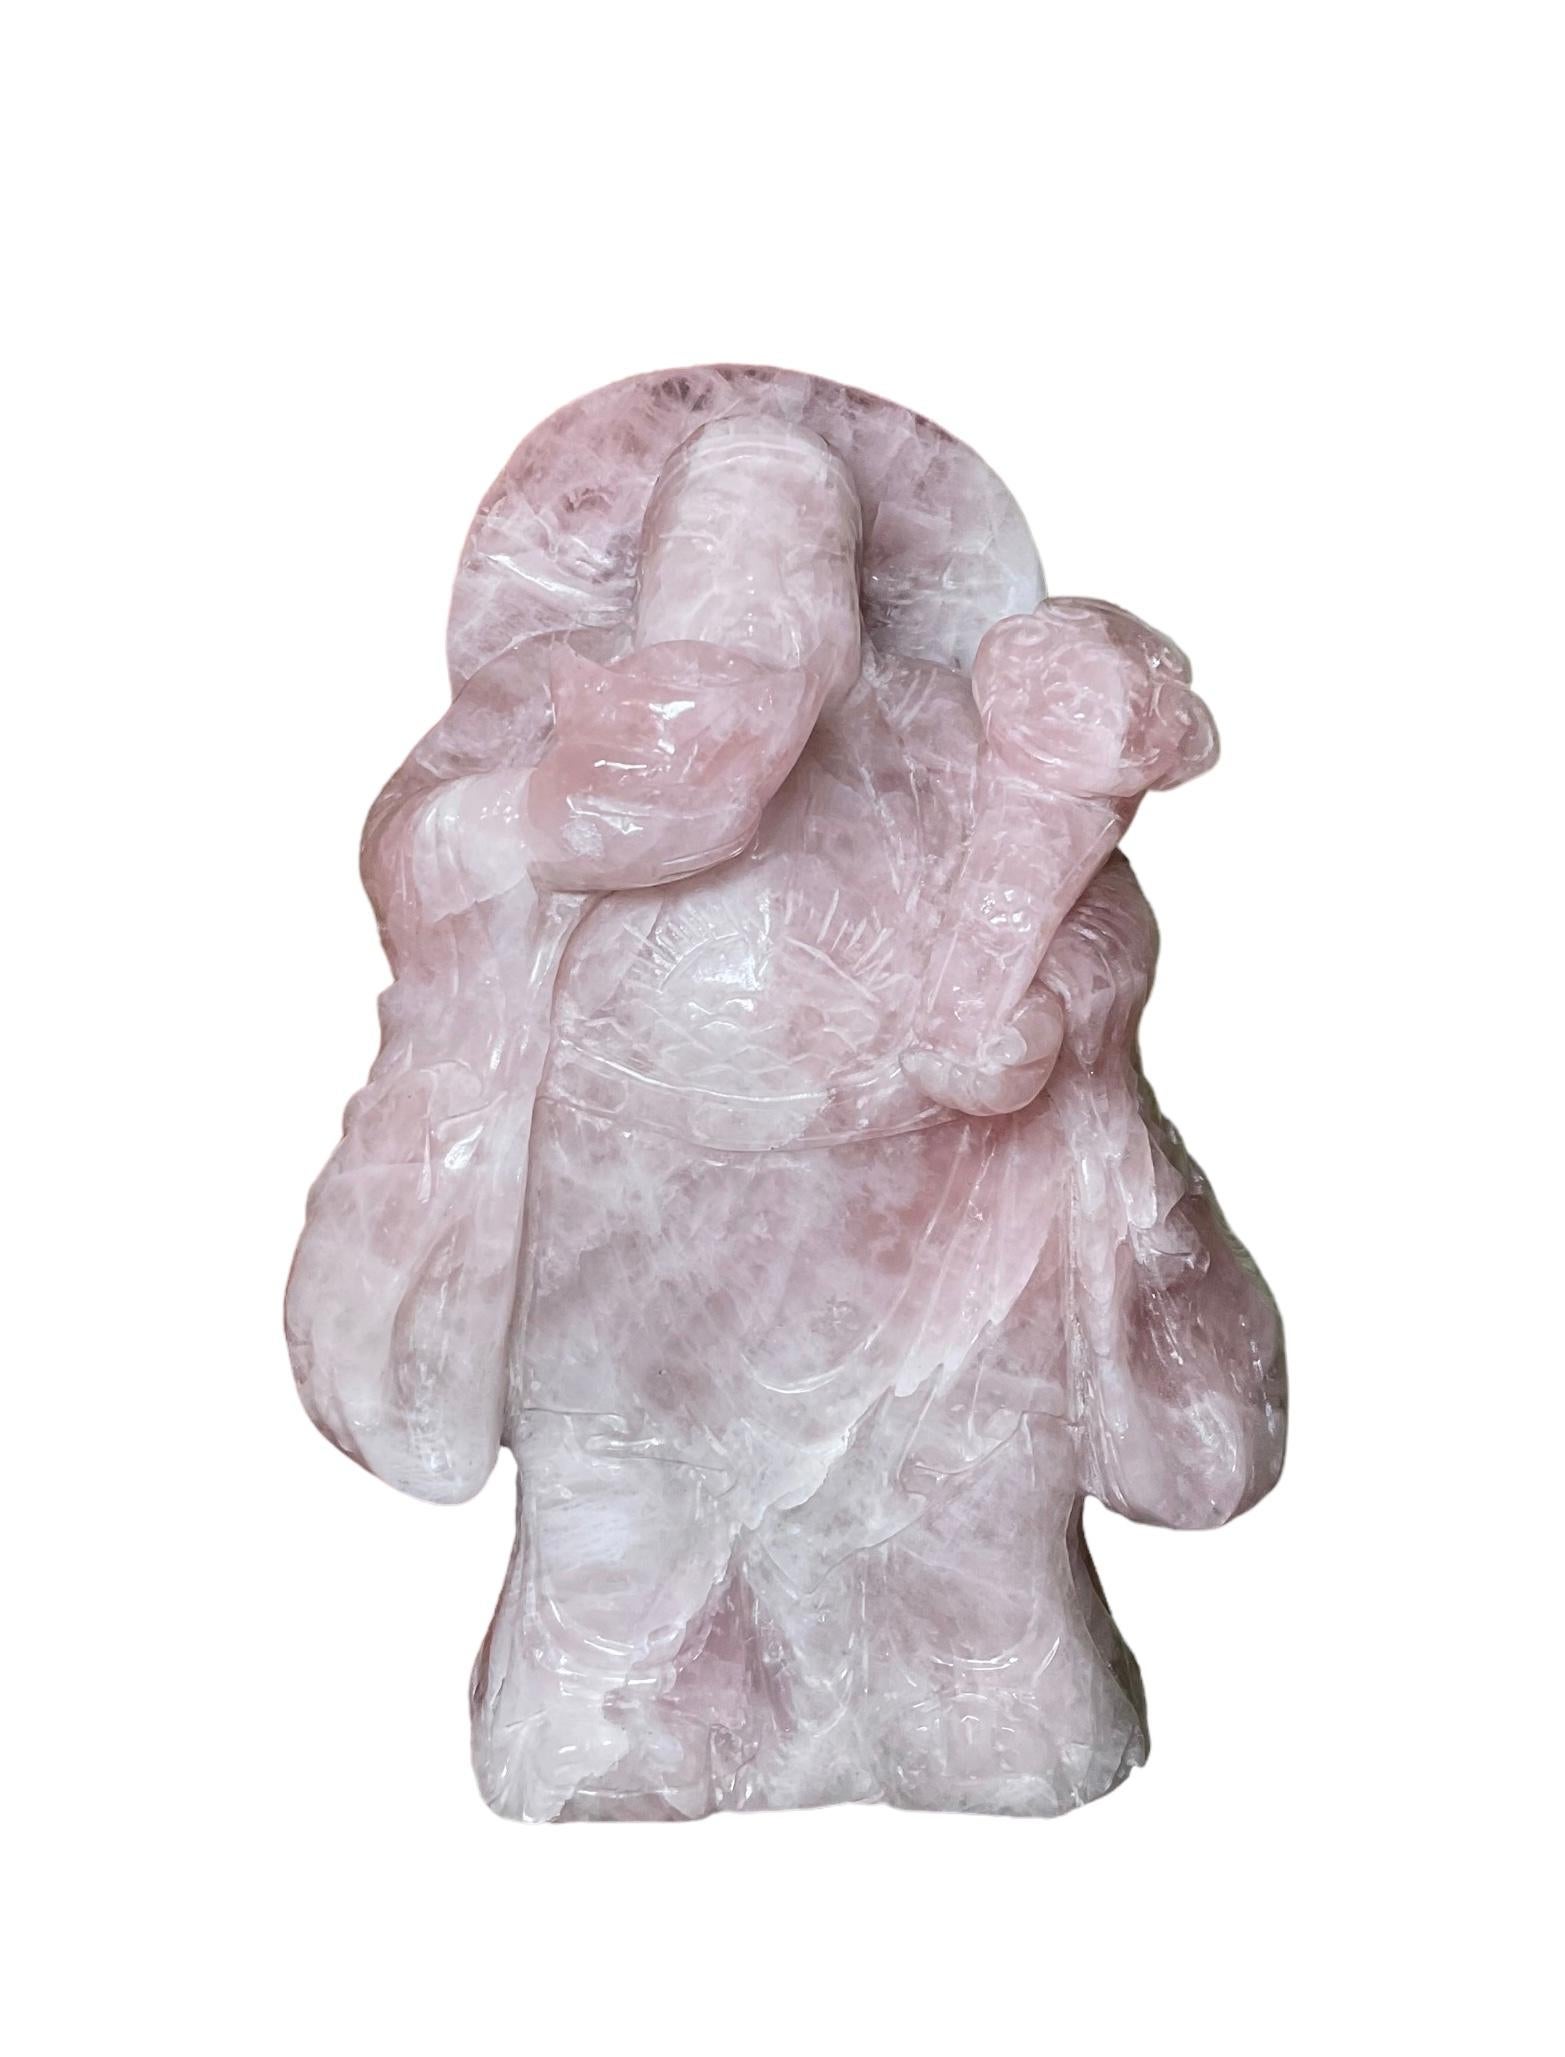 Chinese Rose Quartz Sculpture of a Chinese Man Holding a Ruyi Scepter For Sale 6